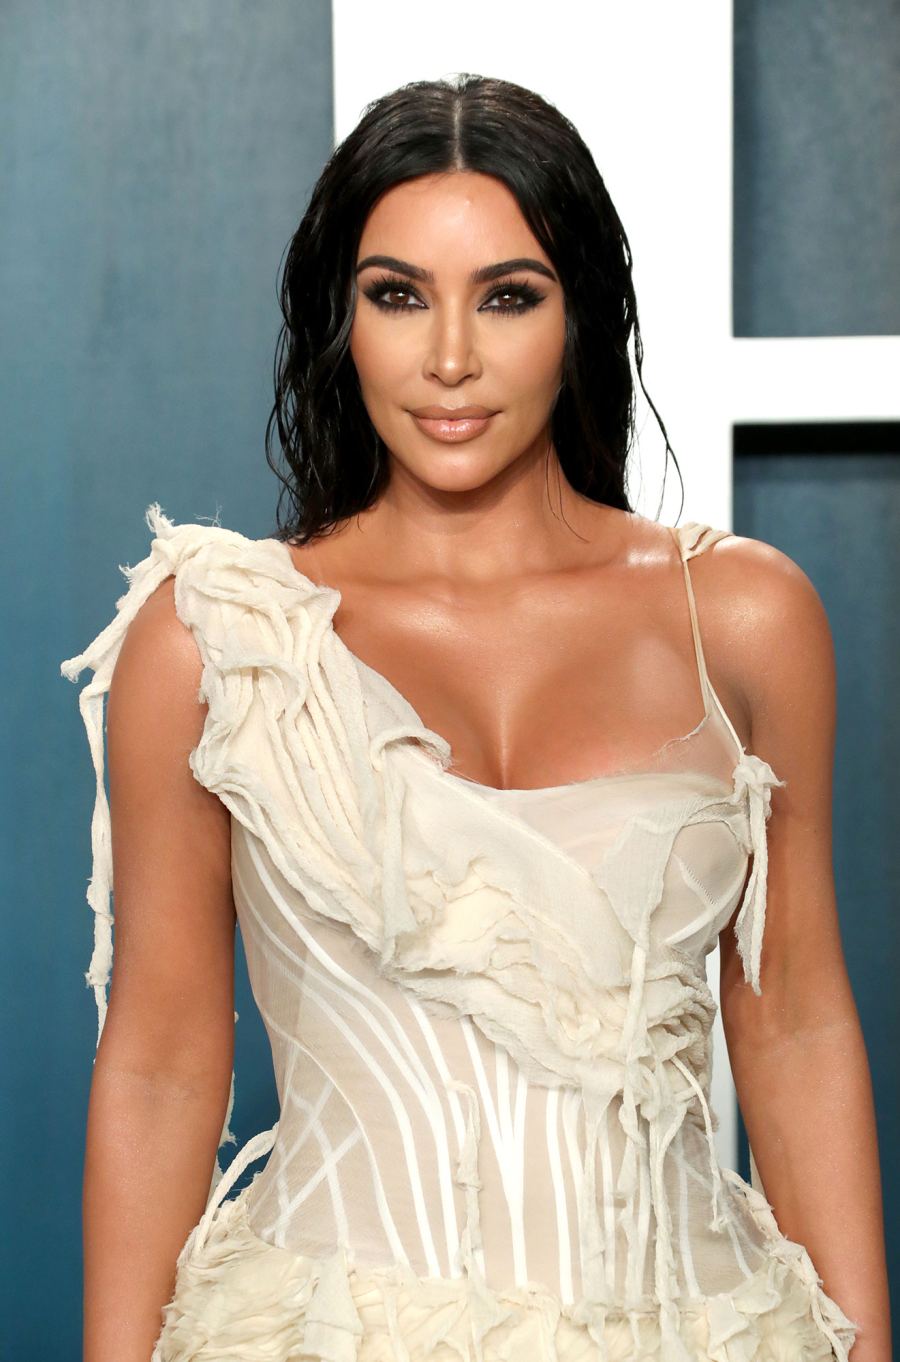 Making Moves to Put It Behind Her Kim Kardashian Blindsided How Triggered People Got Over Her Controversial Work Comments